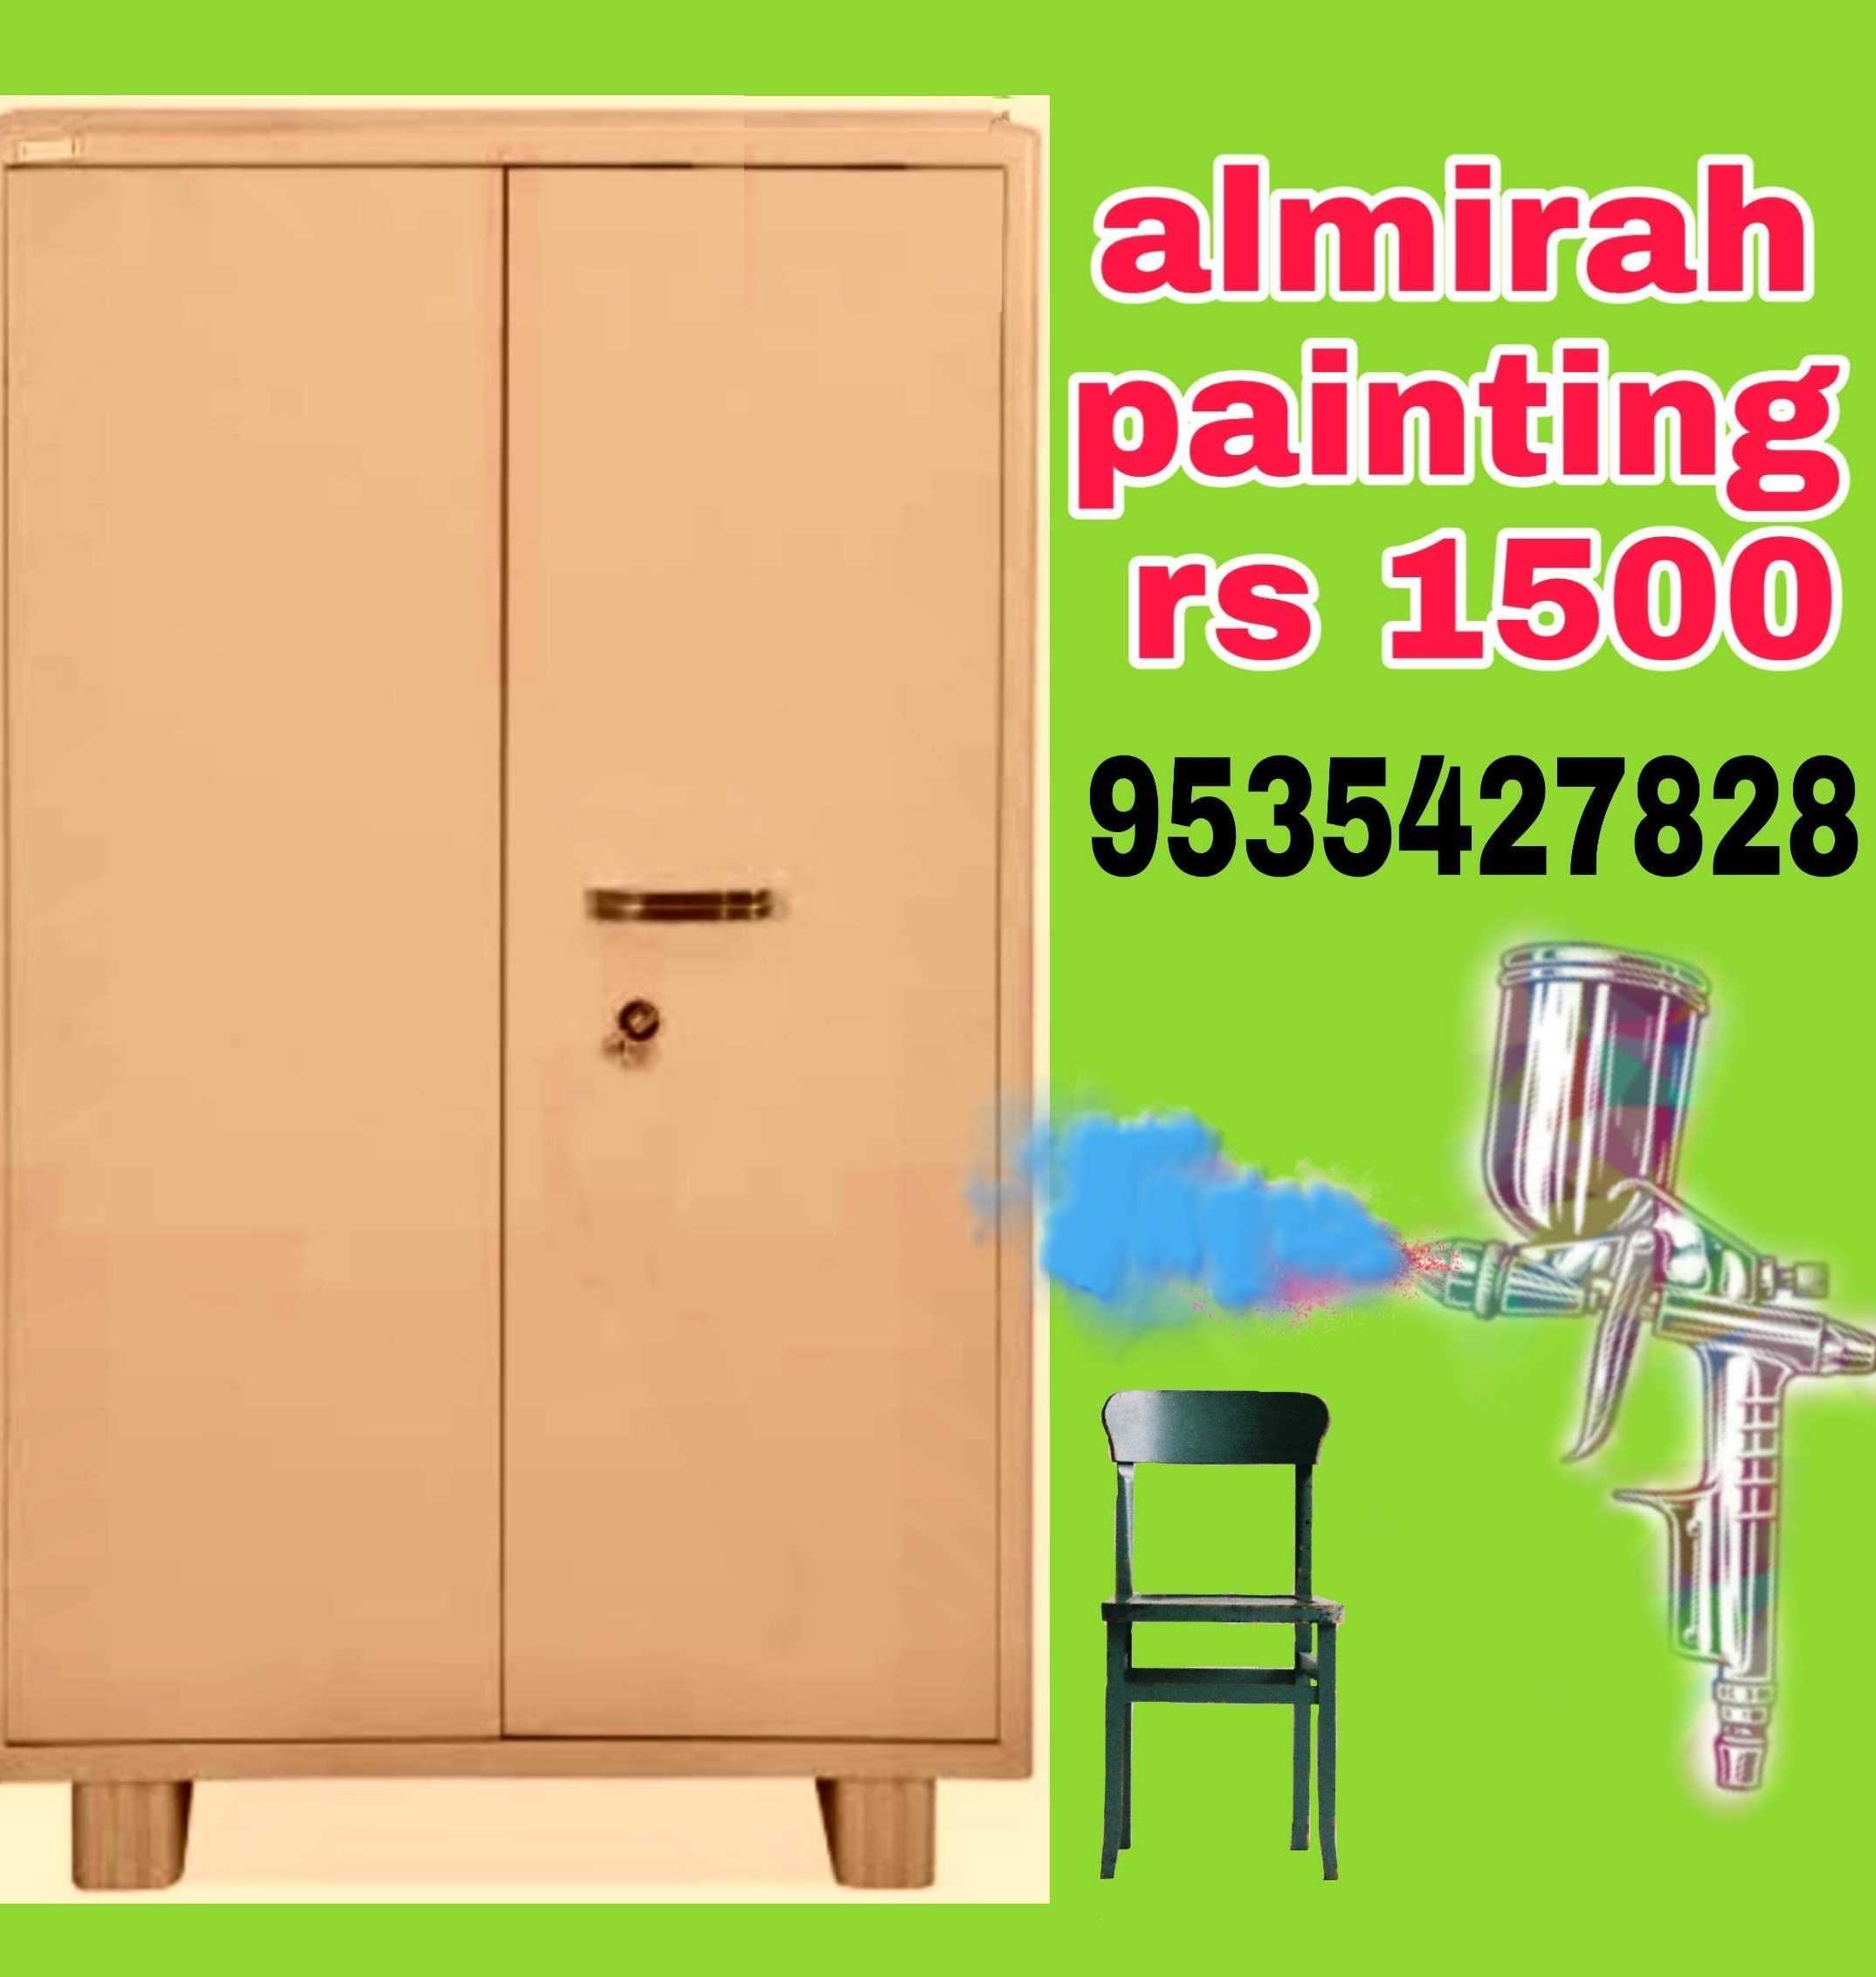 Godrej Almirah Painting Services in Bangalore